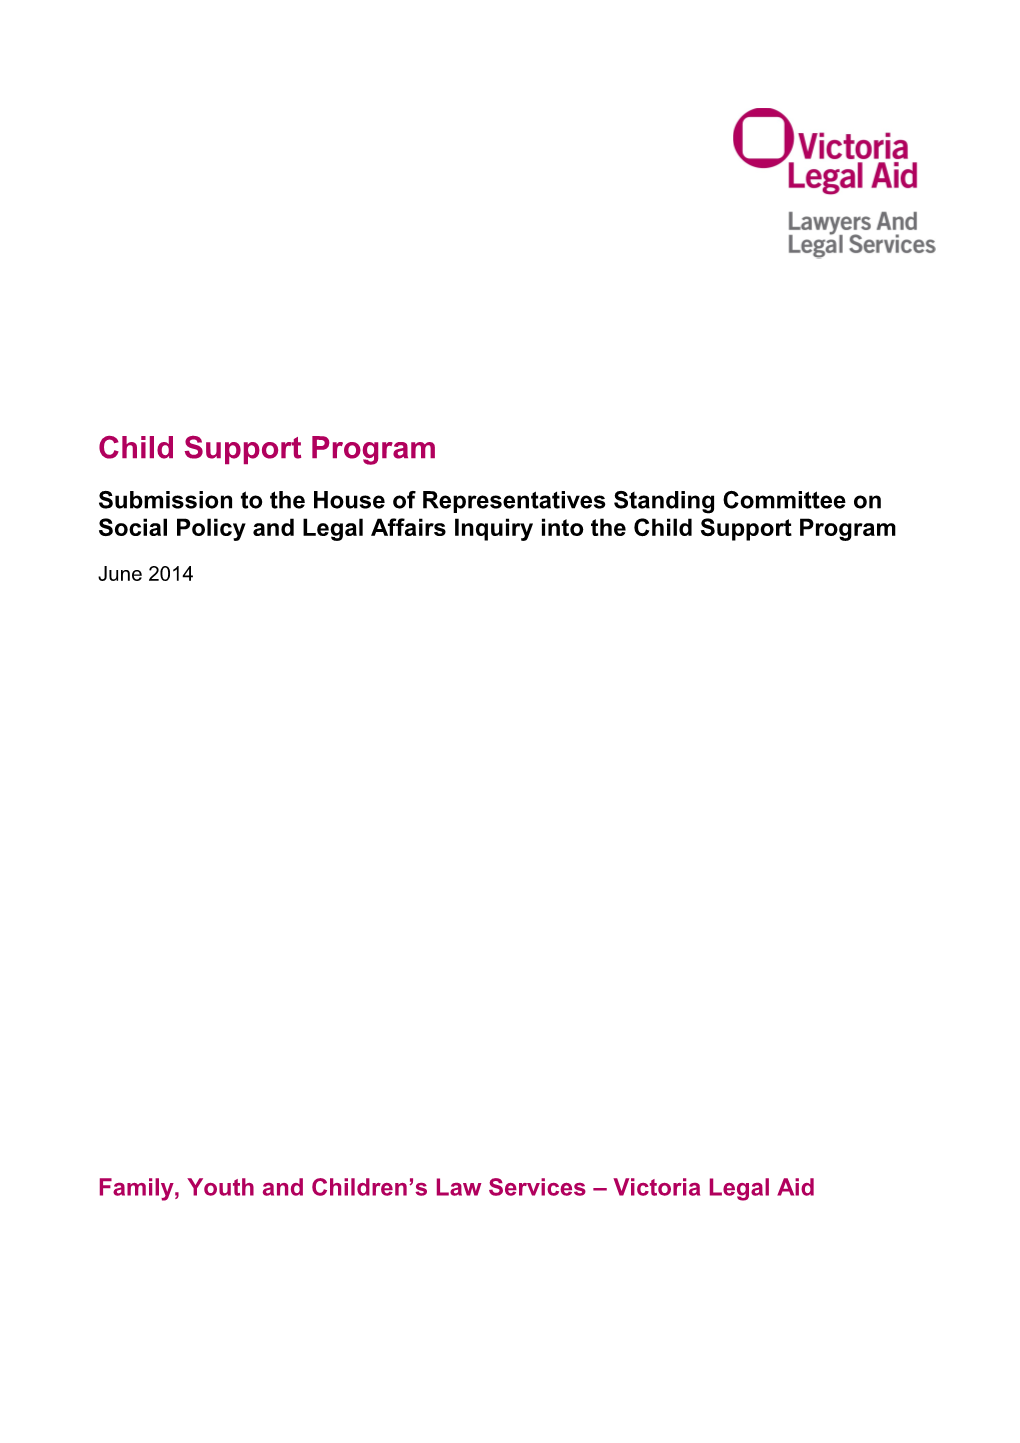 Child Support Program: Submission to the House of Representatives Standing Committee On